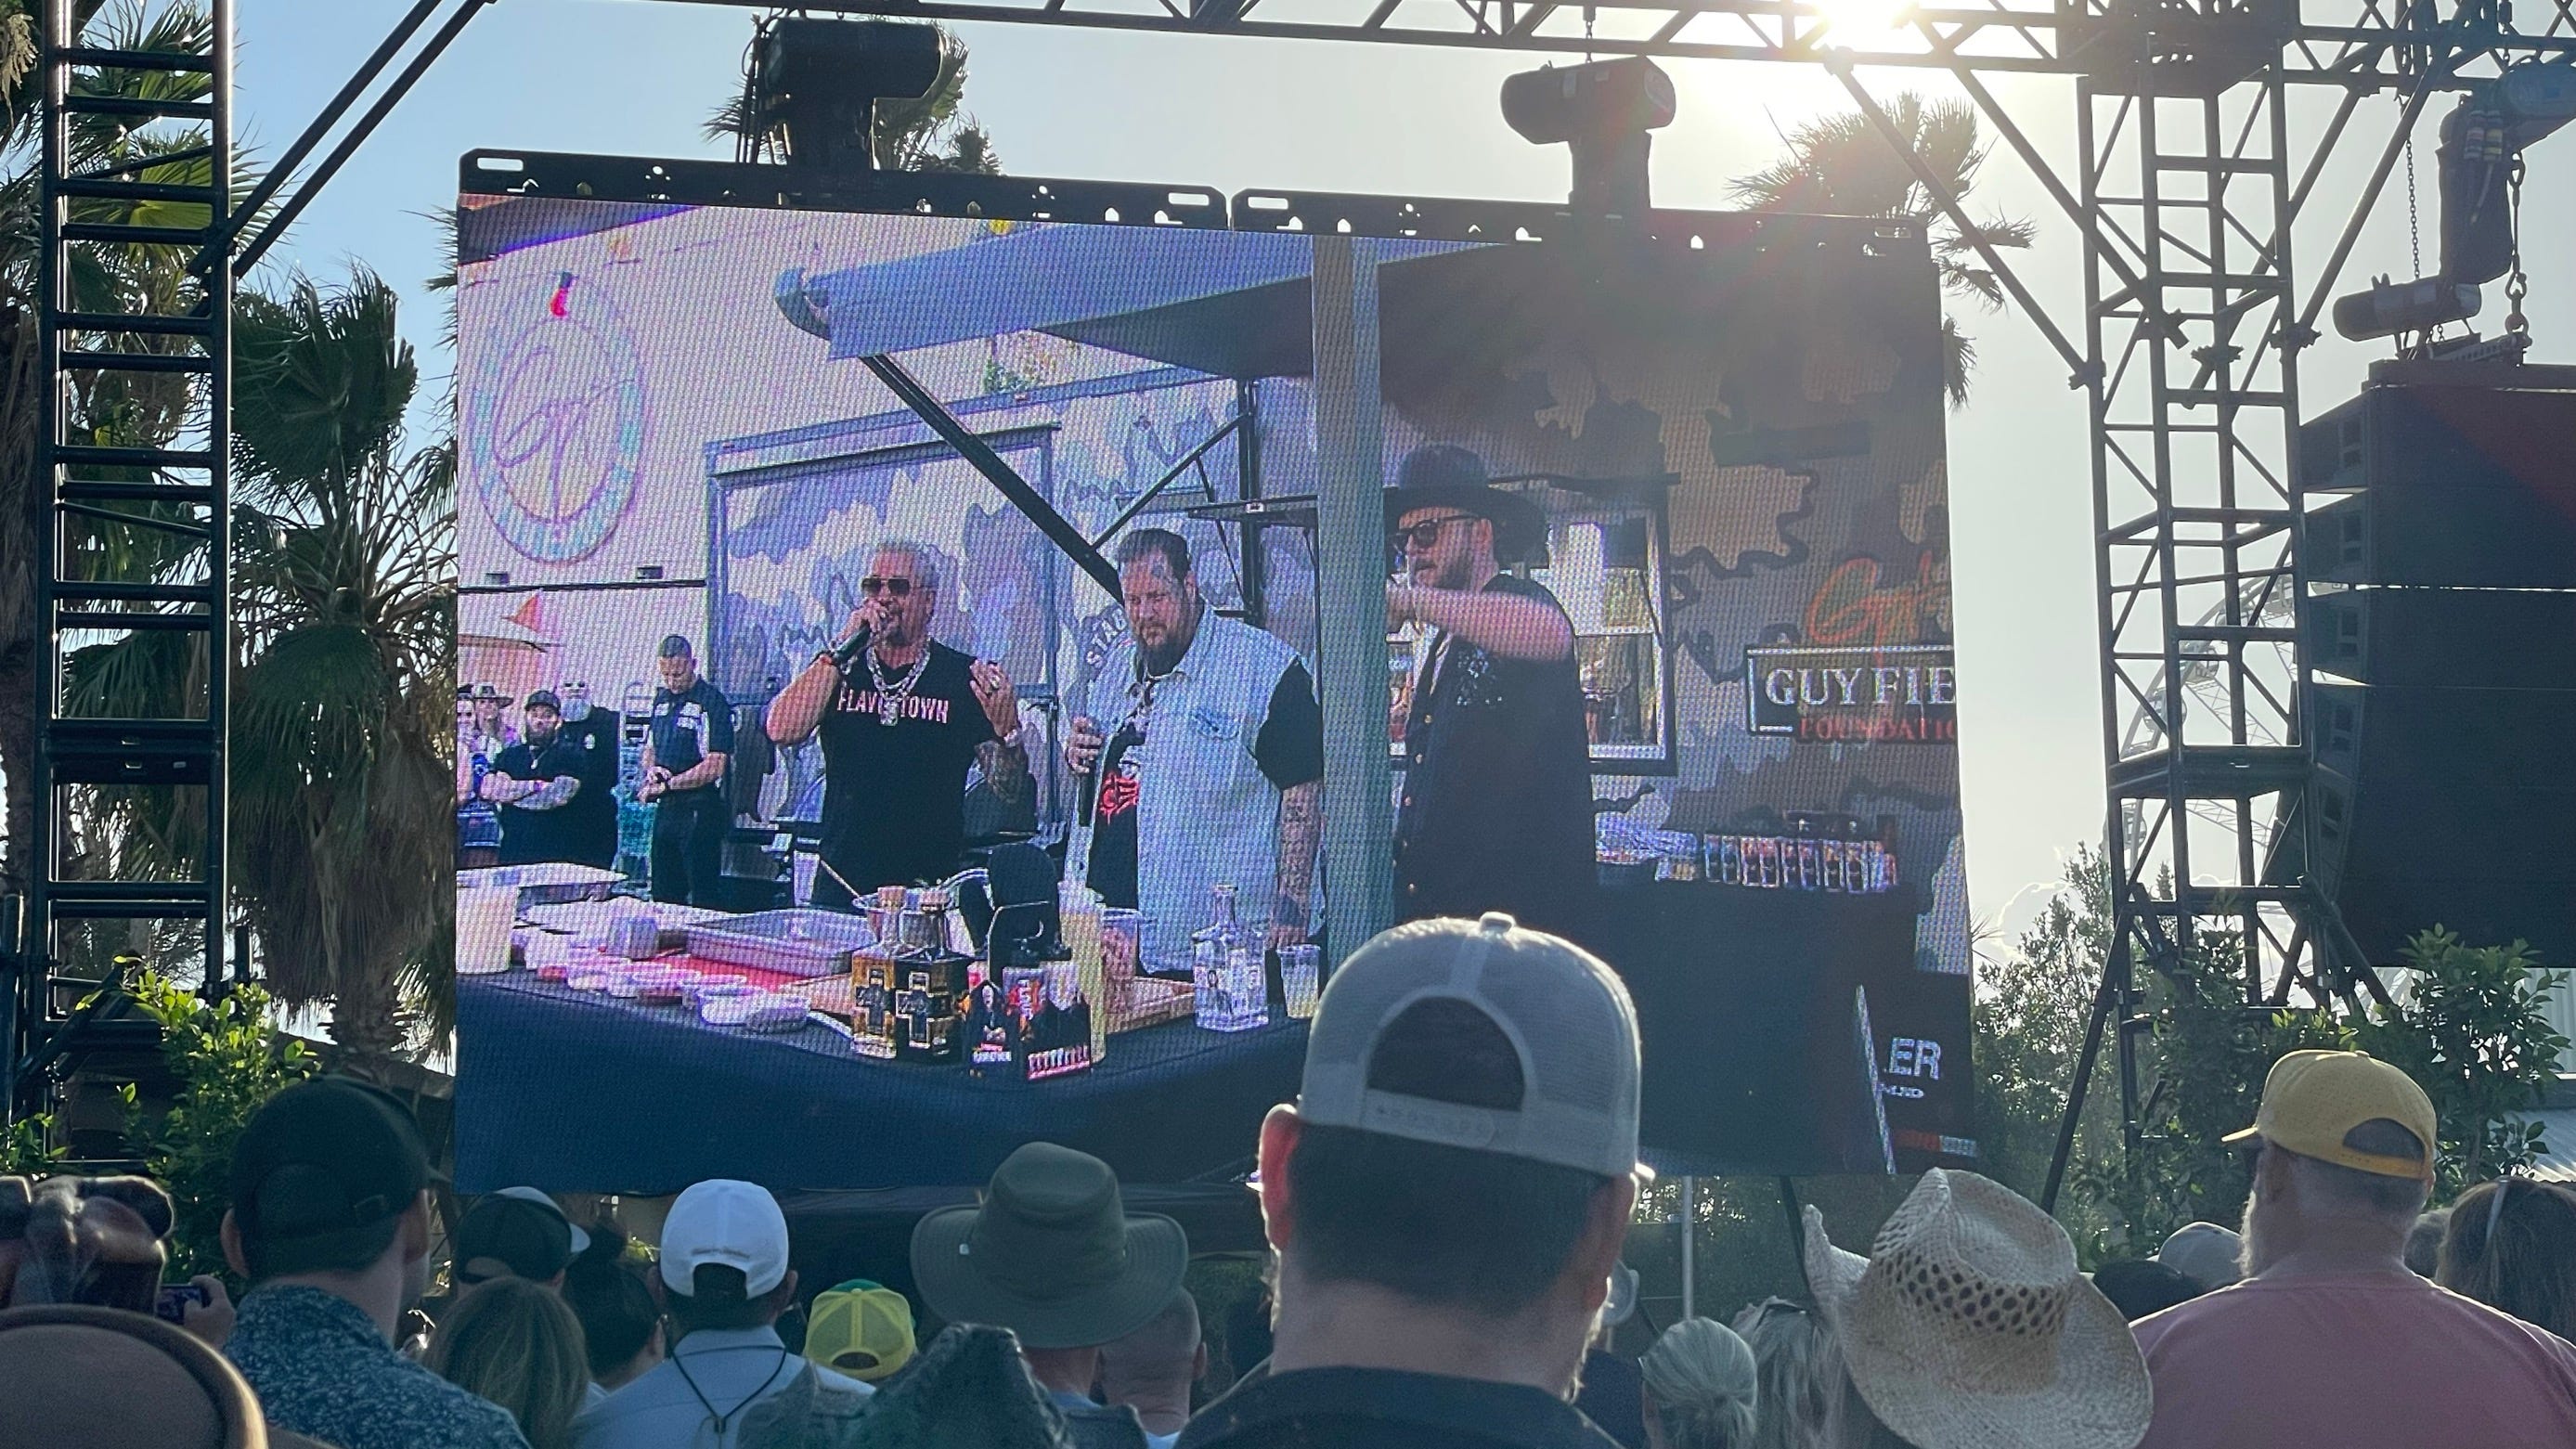 Stagecoach: The wildest moments from Guy Fieri's cooking demo with Paul Cauthen, Jelly Roll